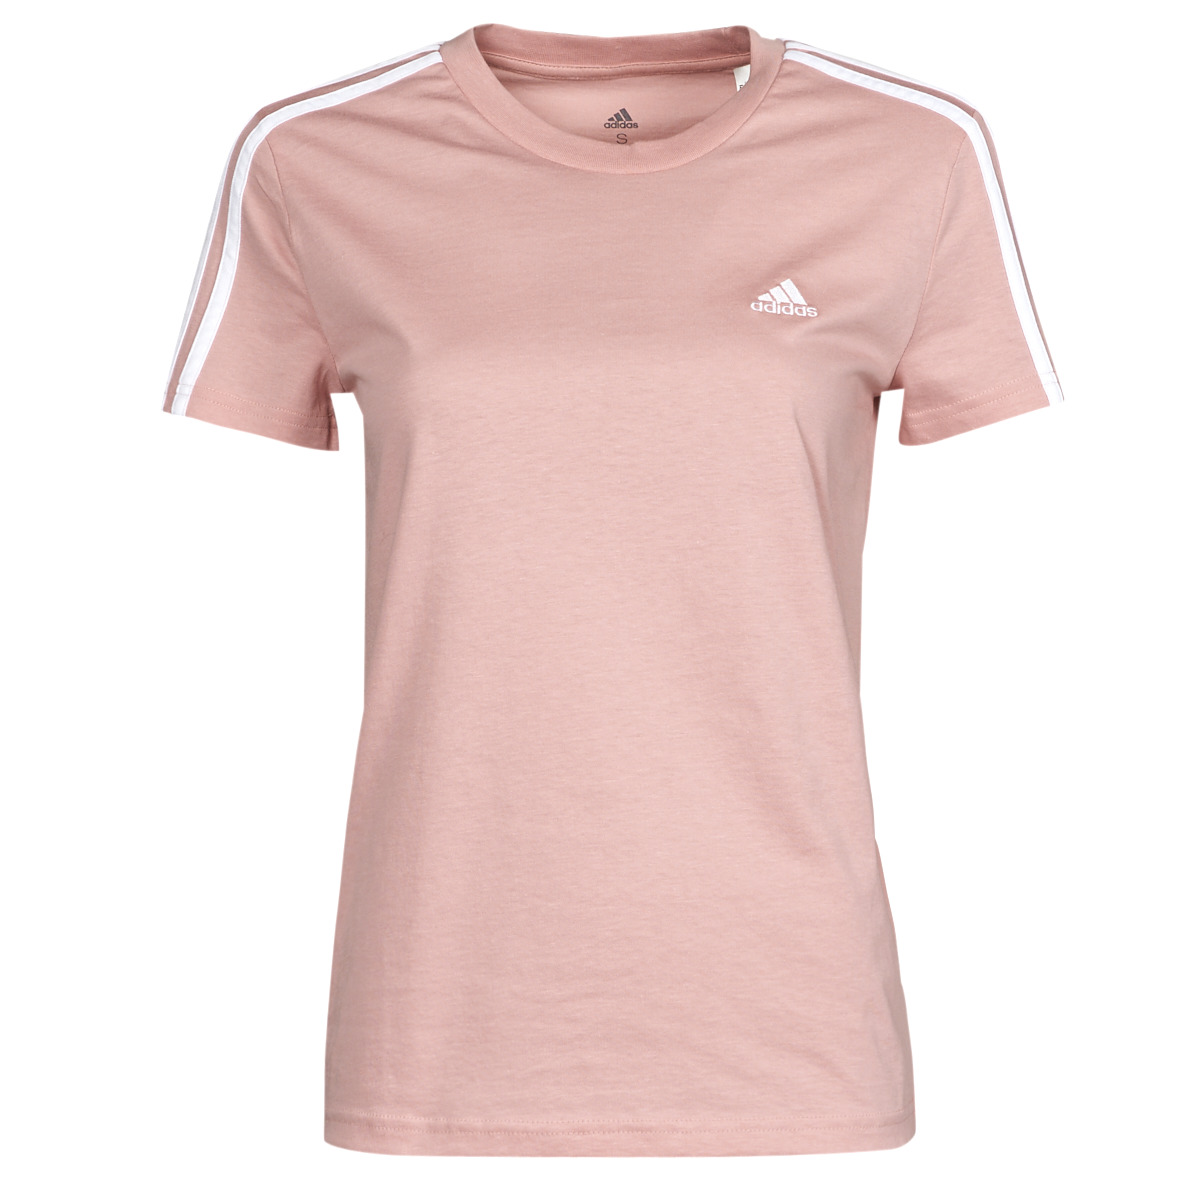 adidas purchase Performance 3 Stripes T SHIRT 21427379 1200 A